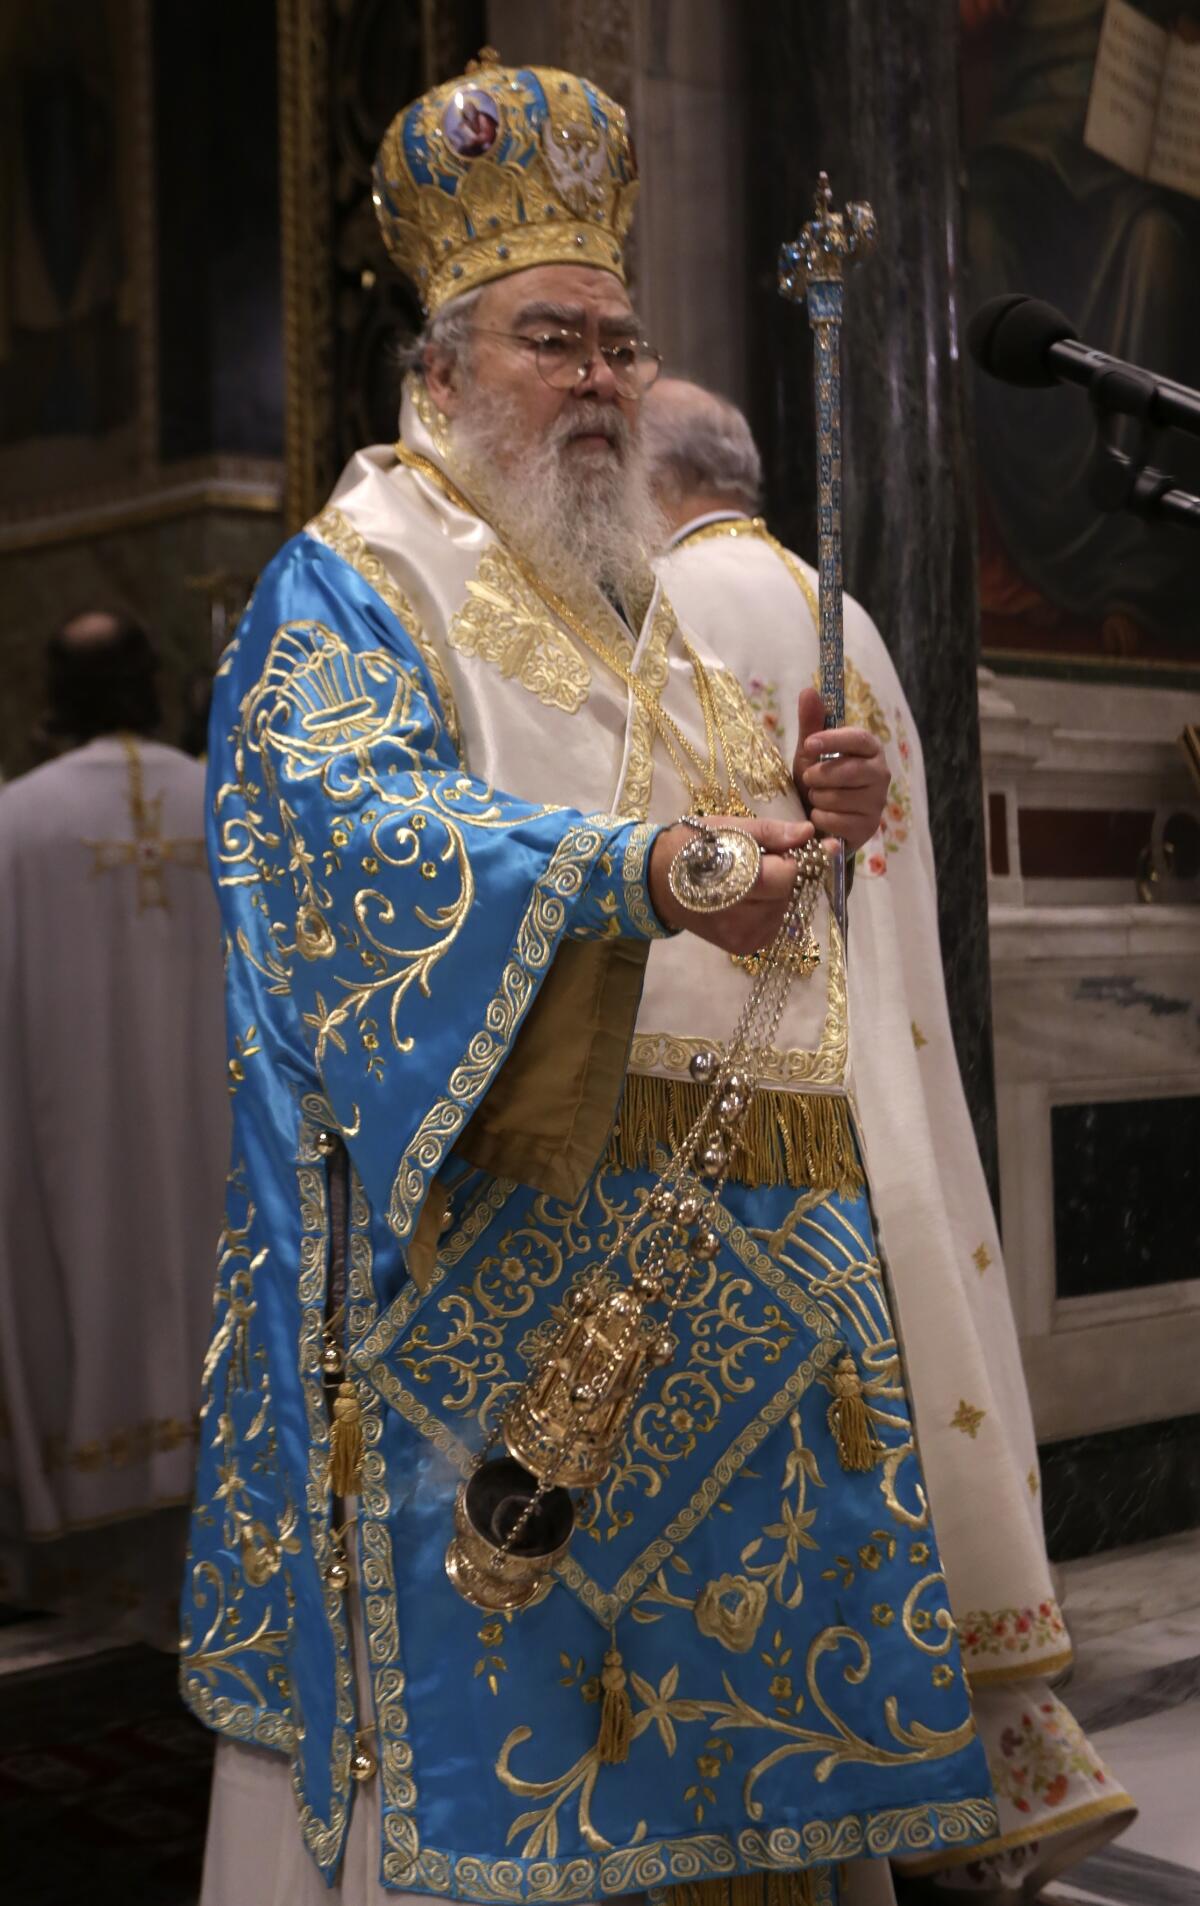 FILE - Chrysostomos, Metropolitan Bishop of Dodoni ordains a priest at Athens Cathedral, Greece, on Monday, Oct. 14, 2019. Chrysostomos' statement in a TV interview Friday, Sept, 2, 2022 that a woman is not raped without her consent and that there can be no conception from a rape have been widely condemned by politicians and by the Greek Orthodox Church itself. (Xristos Bonis/Eurokinissi via AP, File)